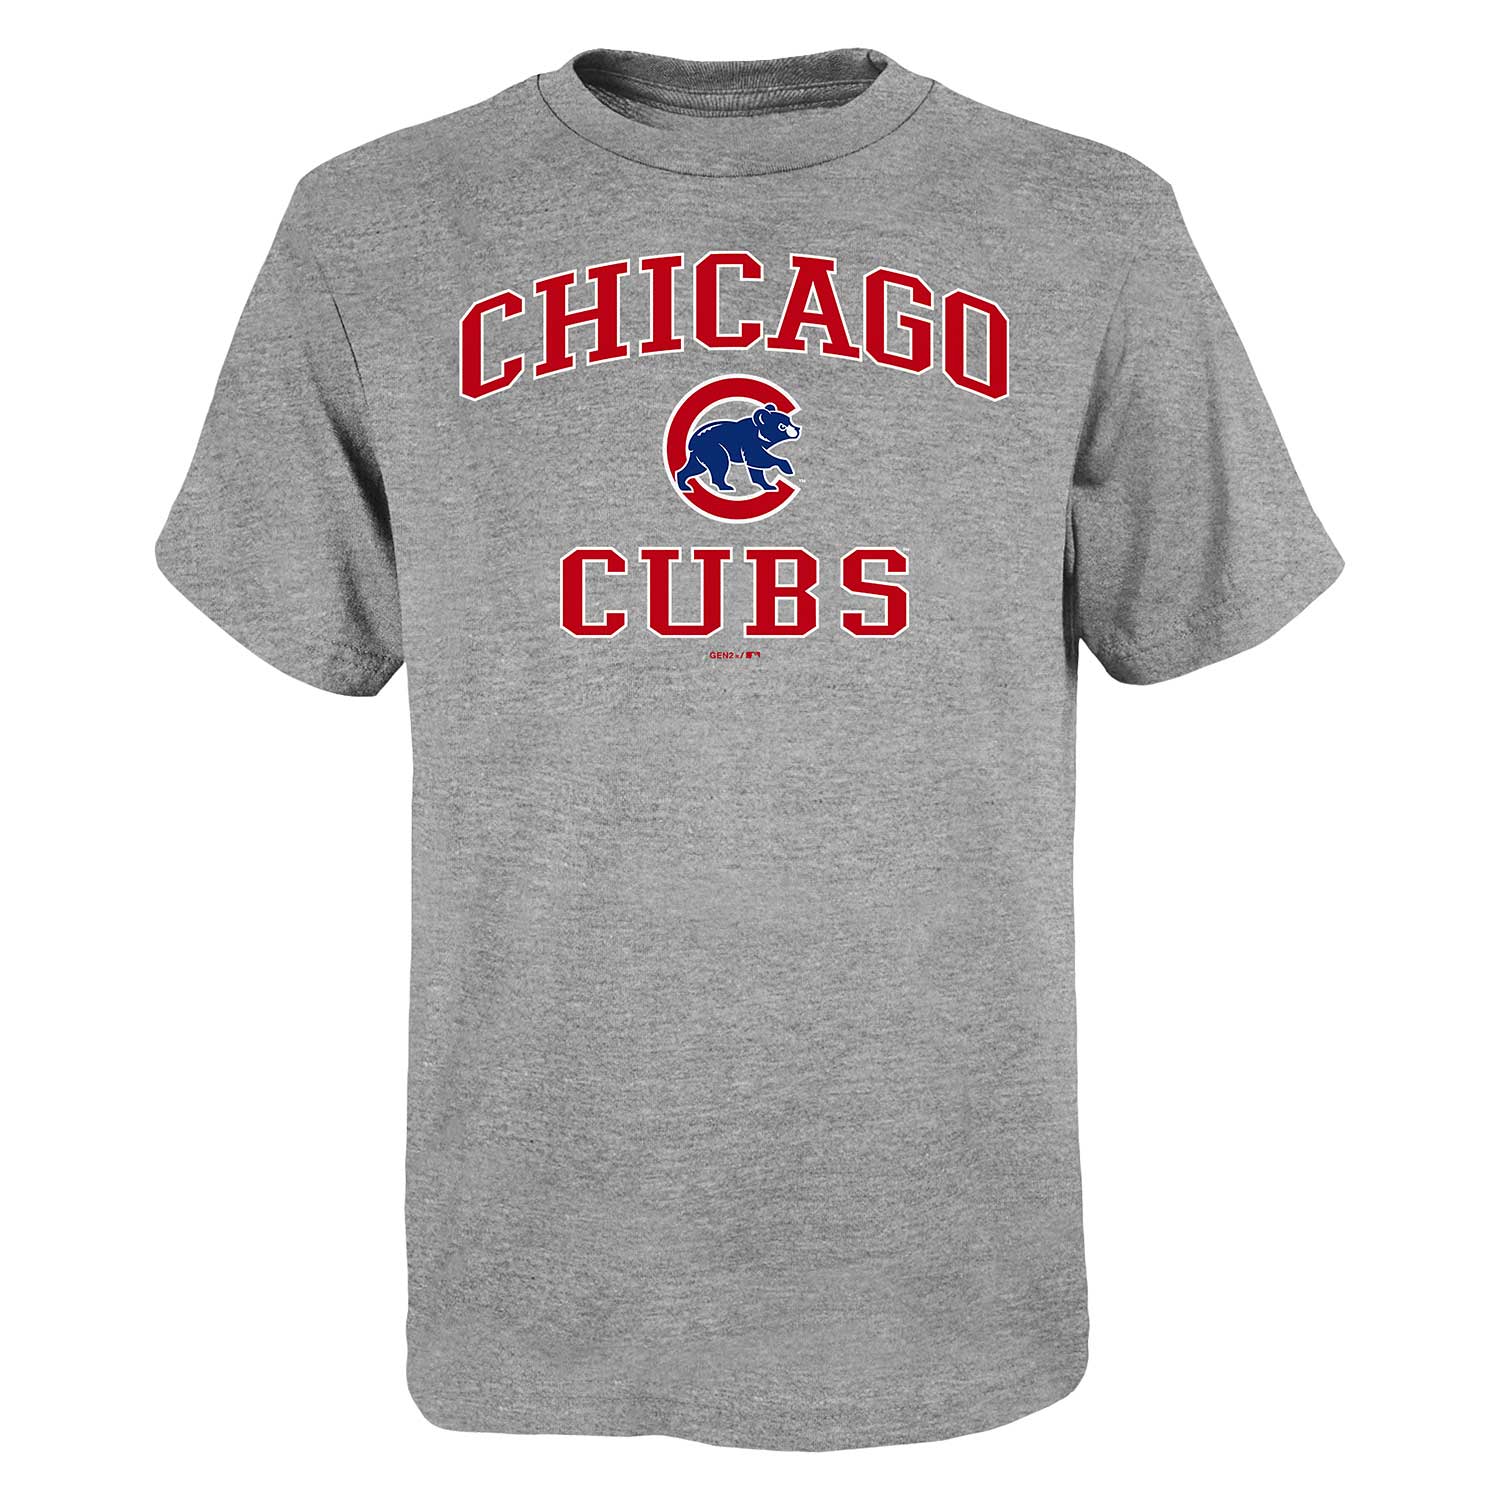 Outerstuff Chicago Cubs Youth Grey Heart and Soul T-Shirt X-Large = 18-20